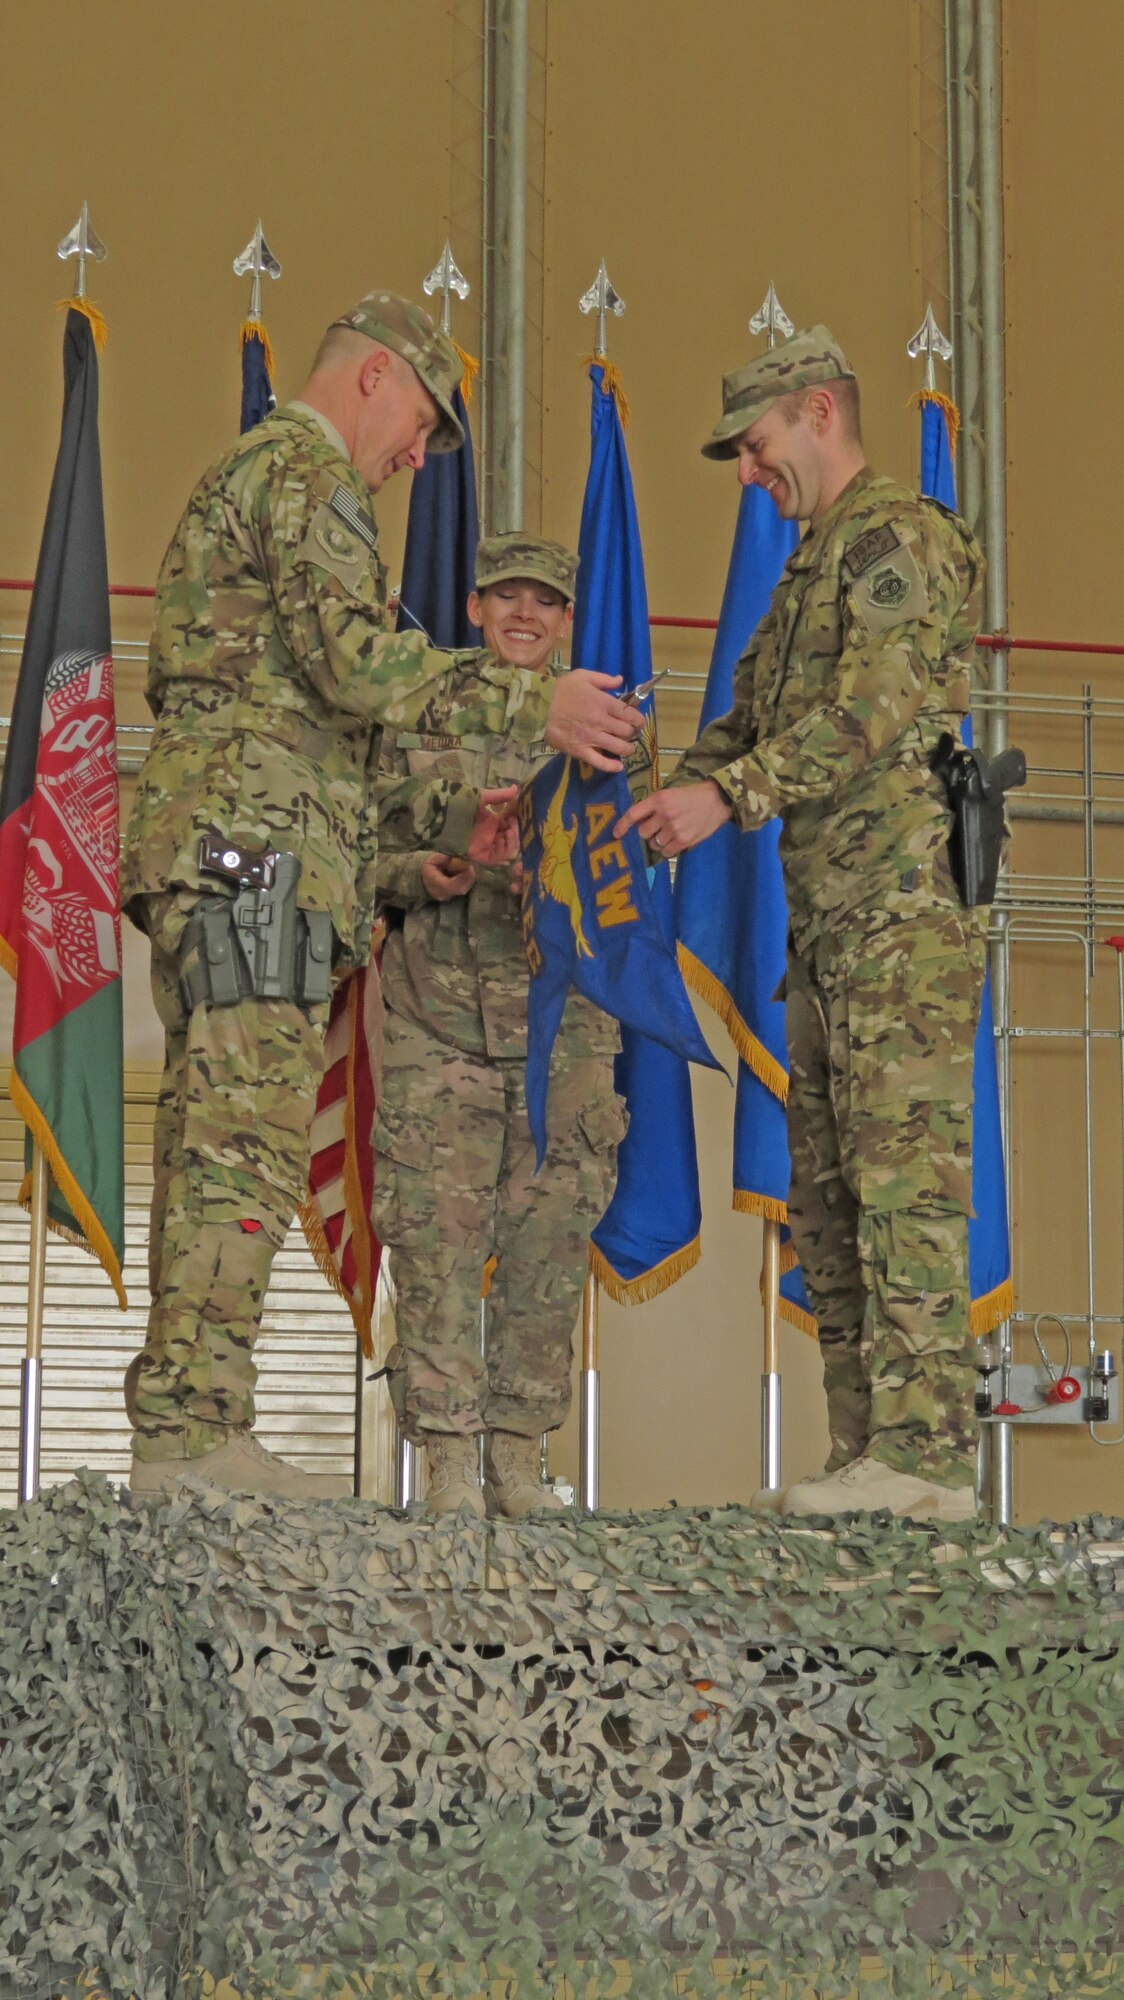 U.S. Air Force Brig. Gen. Patrick Malackowski, 455th Air Expeditionary Wing commander and Col. Scott Campbell, 451st Air Expeditionary Group commander, unfurl the new 451st AEG guidon in a transition ceremony at Kandahar Airfield, Afghanistan, Jan. 13, 2014. The 451st Air Expeditionary Wing was transitioned to an AEG due to a change in mission.(U.S. Air Force photo by Senior Airman Alexandria Bandin/Released)                              